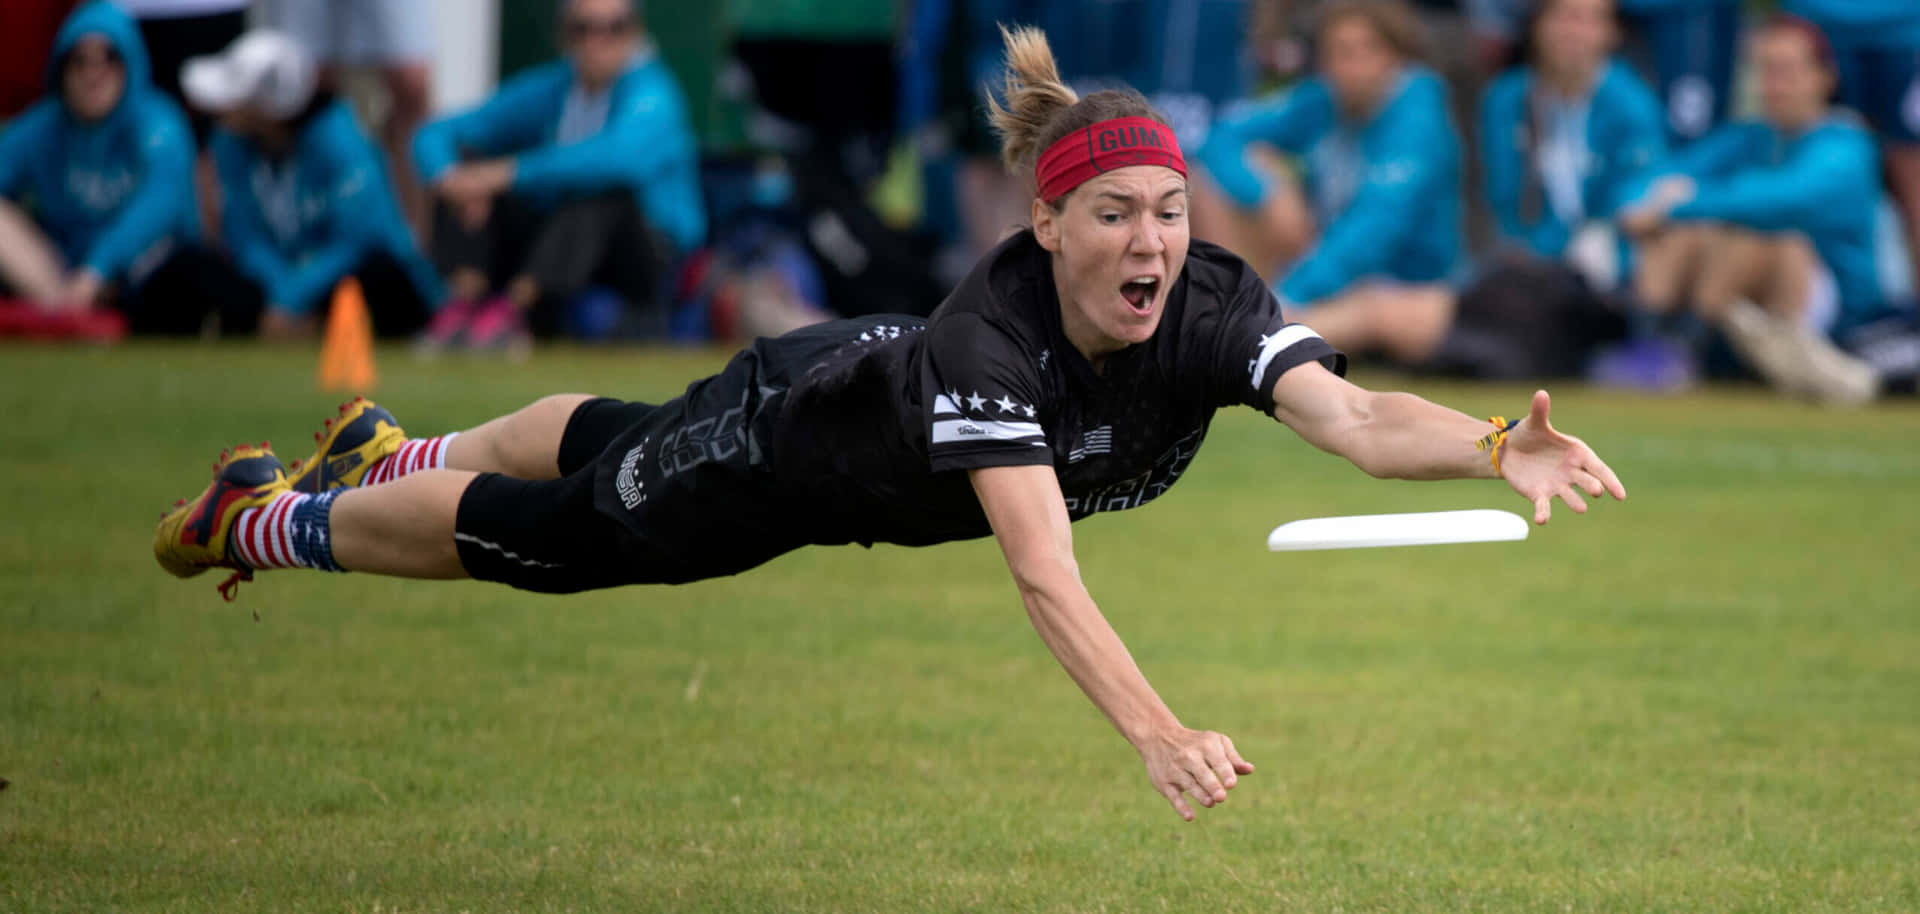 Dynamic Ultimate Frisbee Action in 1080p